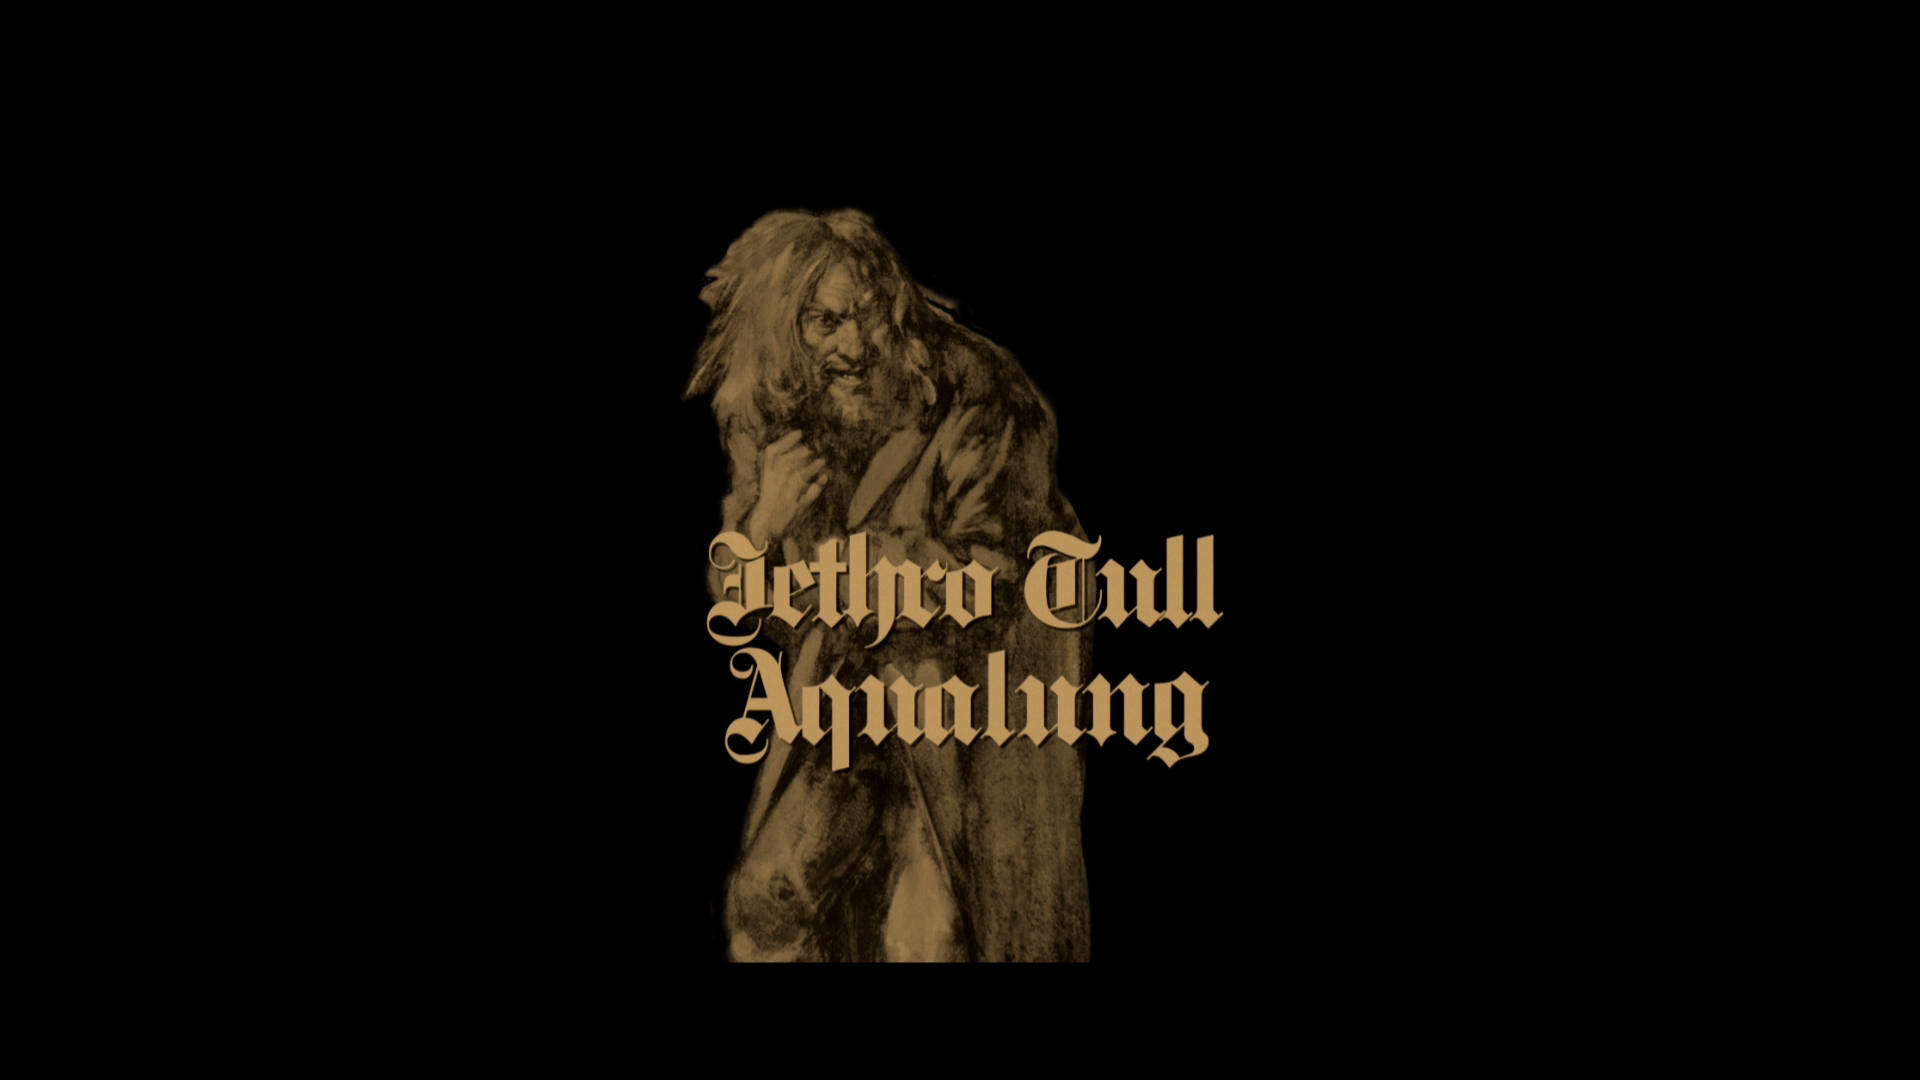 Rock And Roll Band Jethro Tull Aqualung Minimalist Illustration Picture